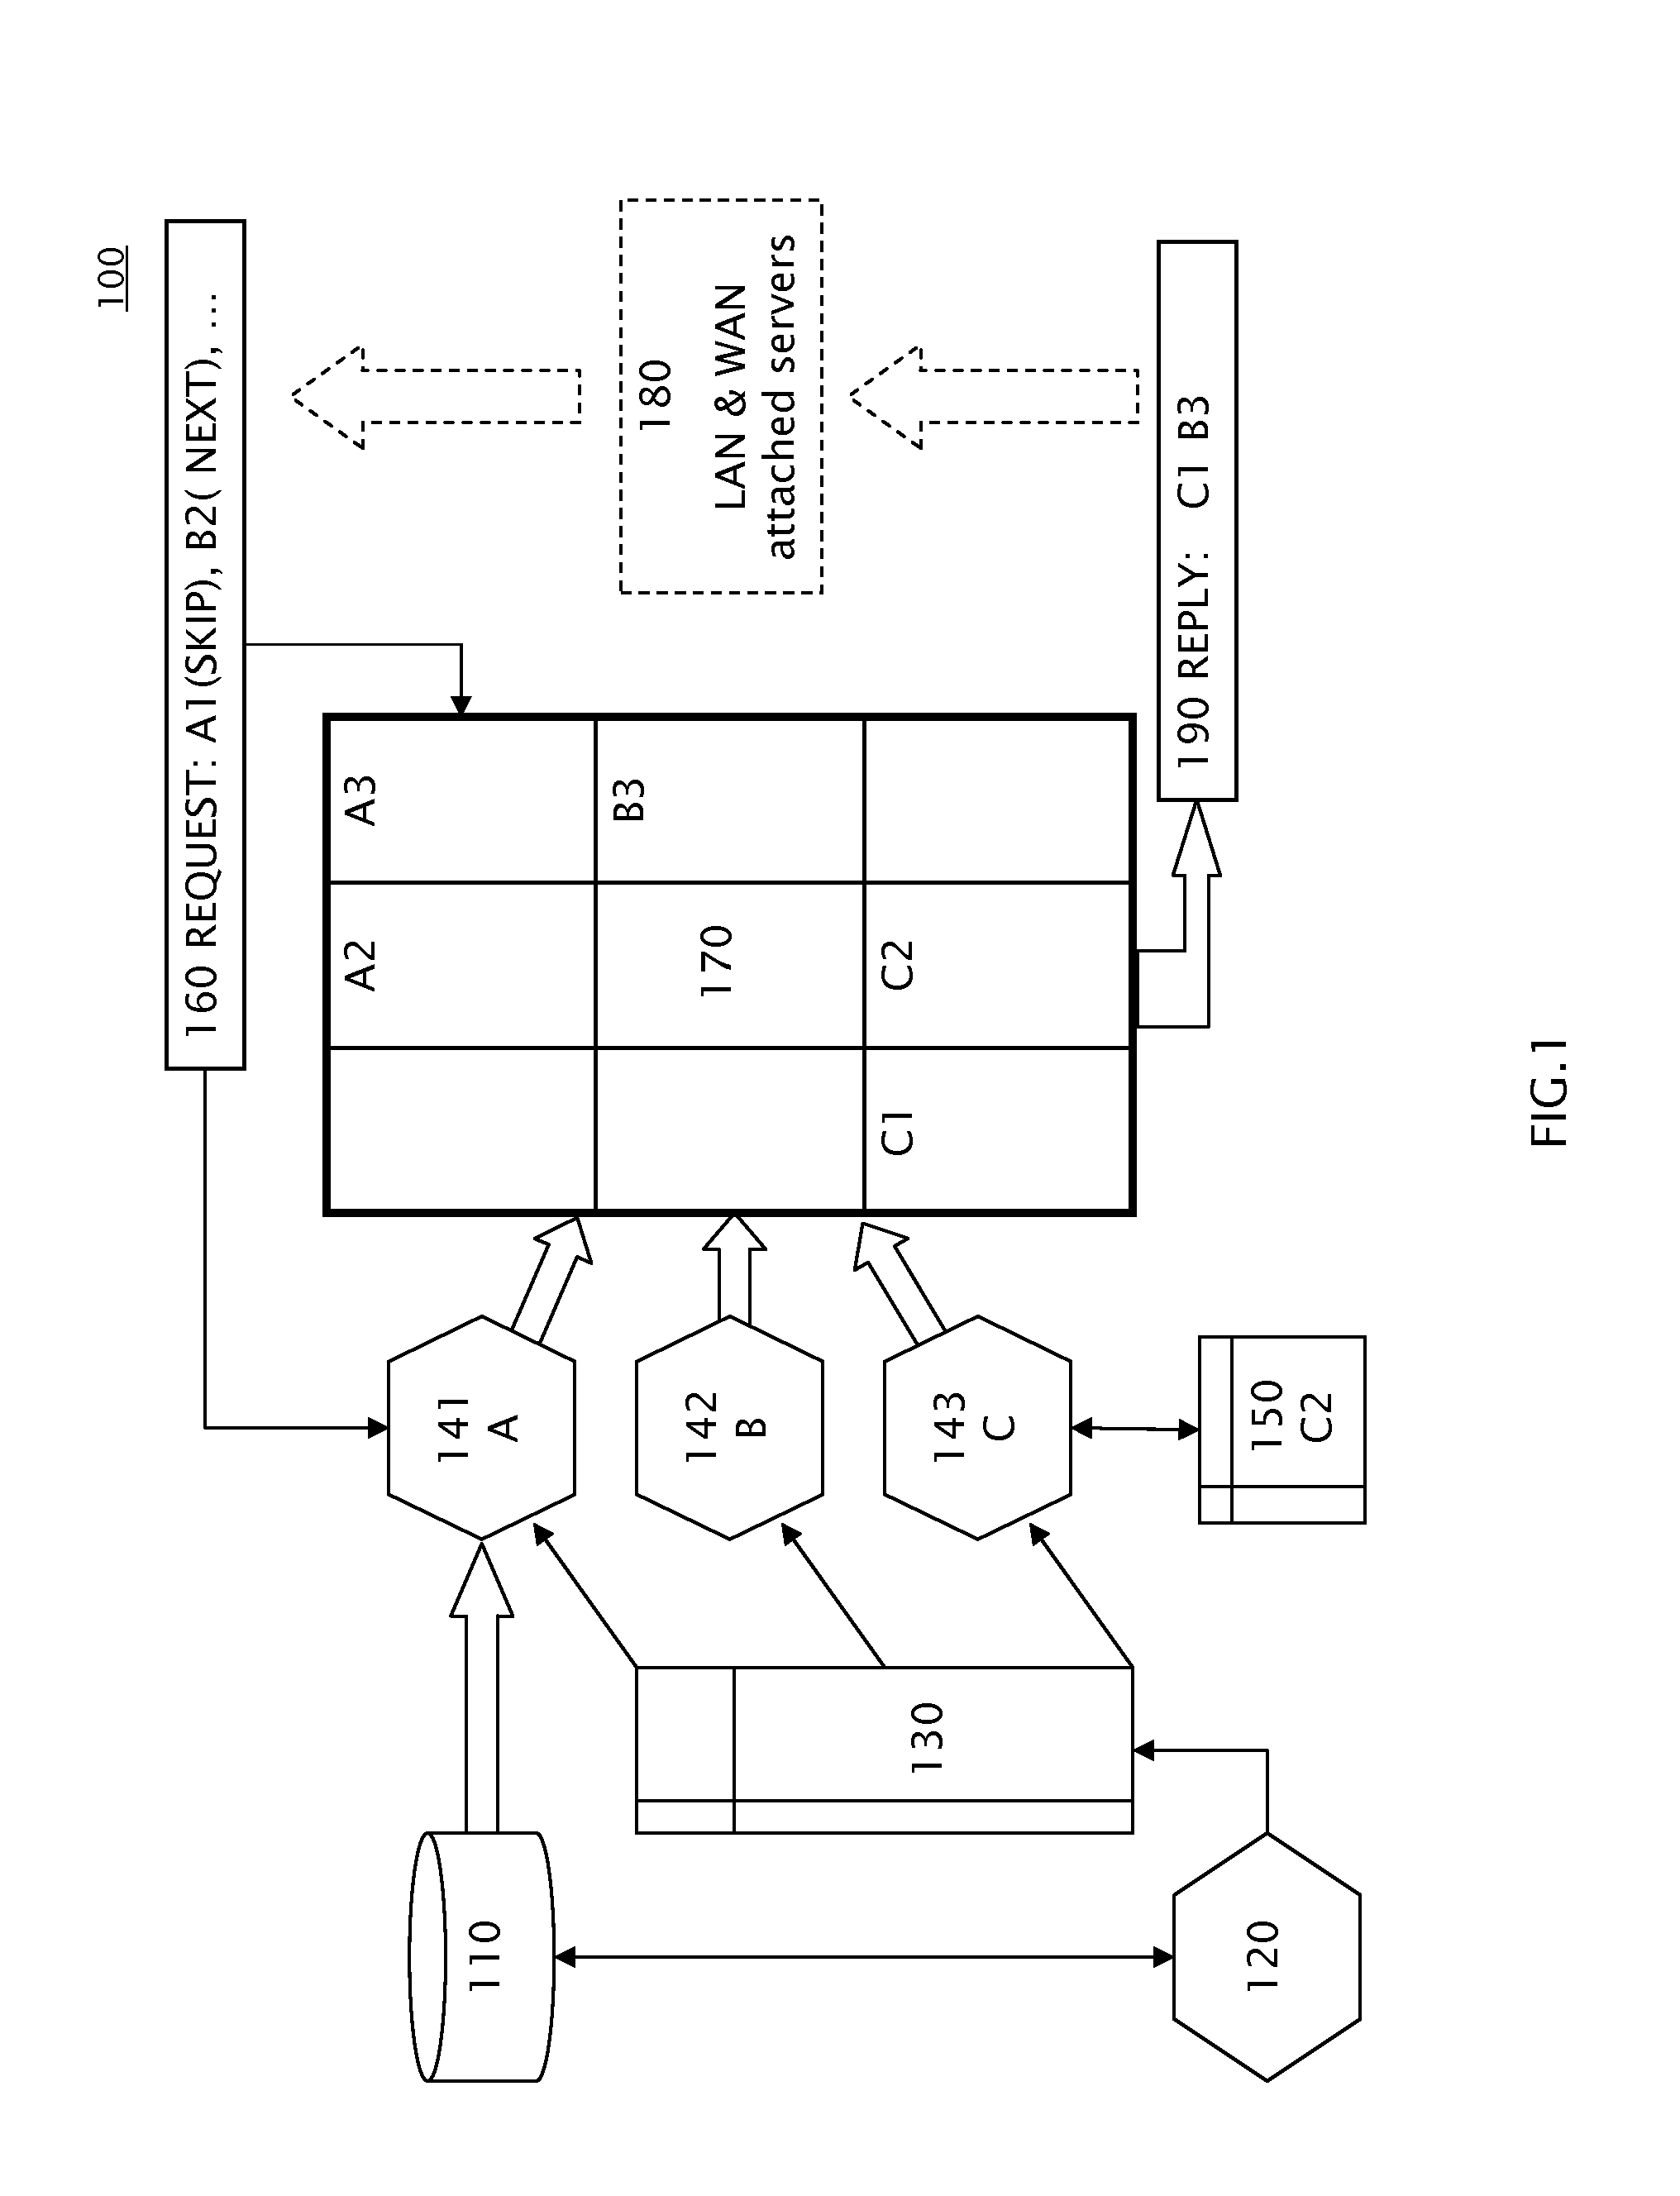 Multi-streamed method for optimizing data transfer through parallelized interlacing of data based upon sorted characteristics to minimize latencies inherent in the system